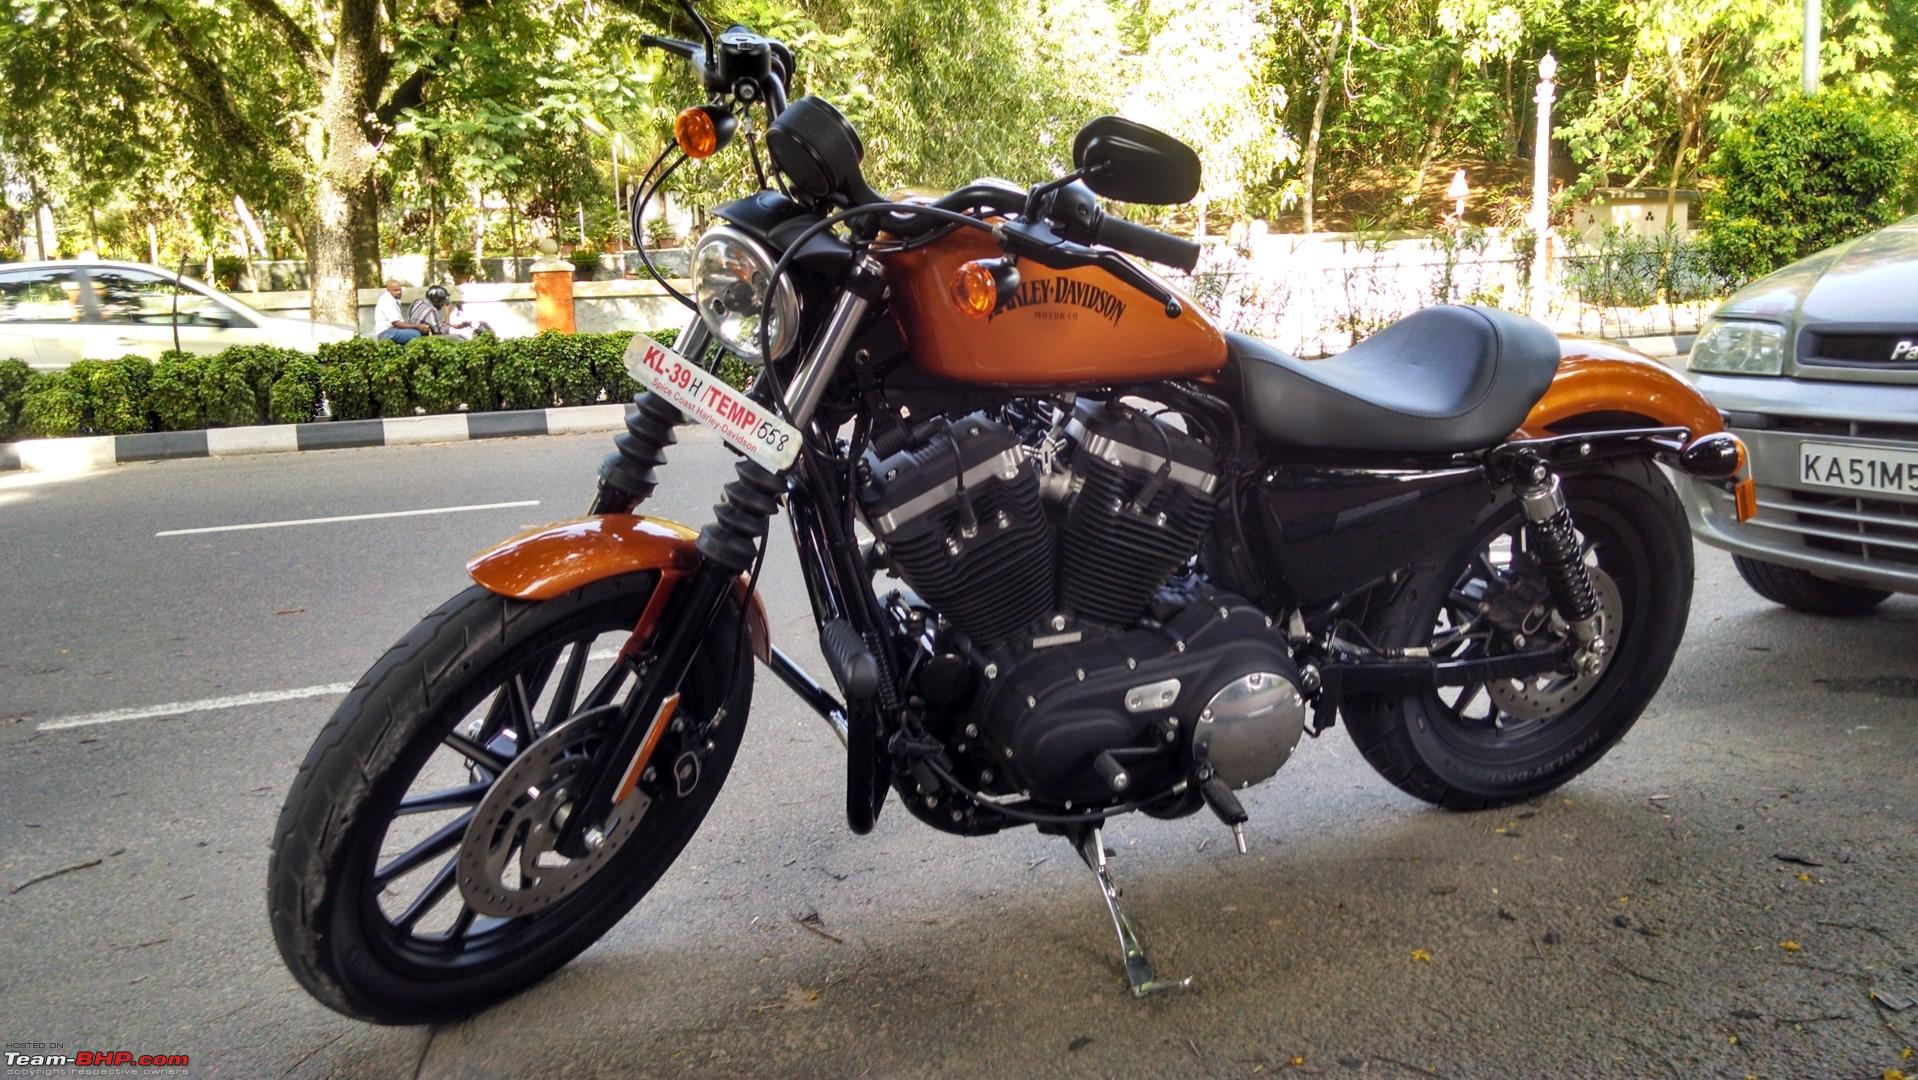 Harley Davidson Iron 883 Price In India On Road Promotion Off62